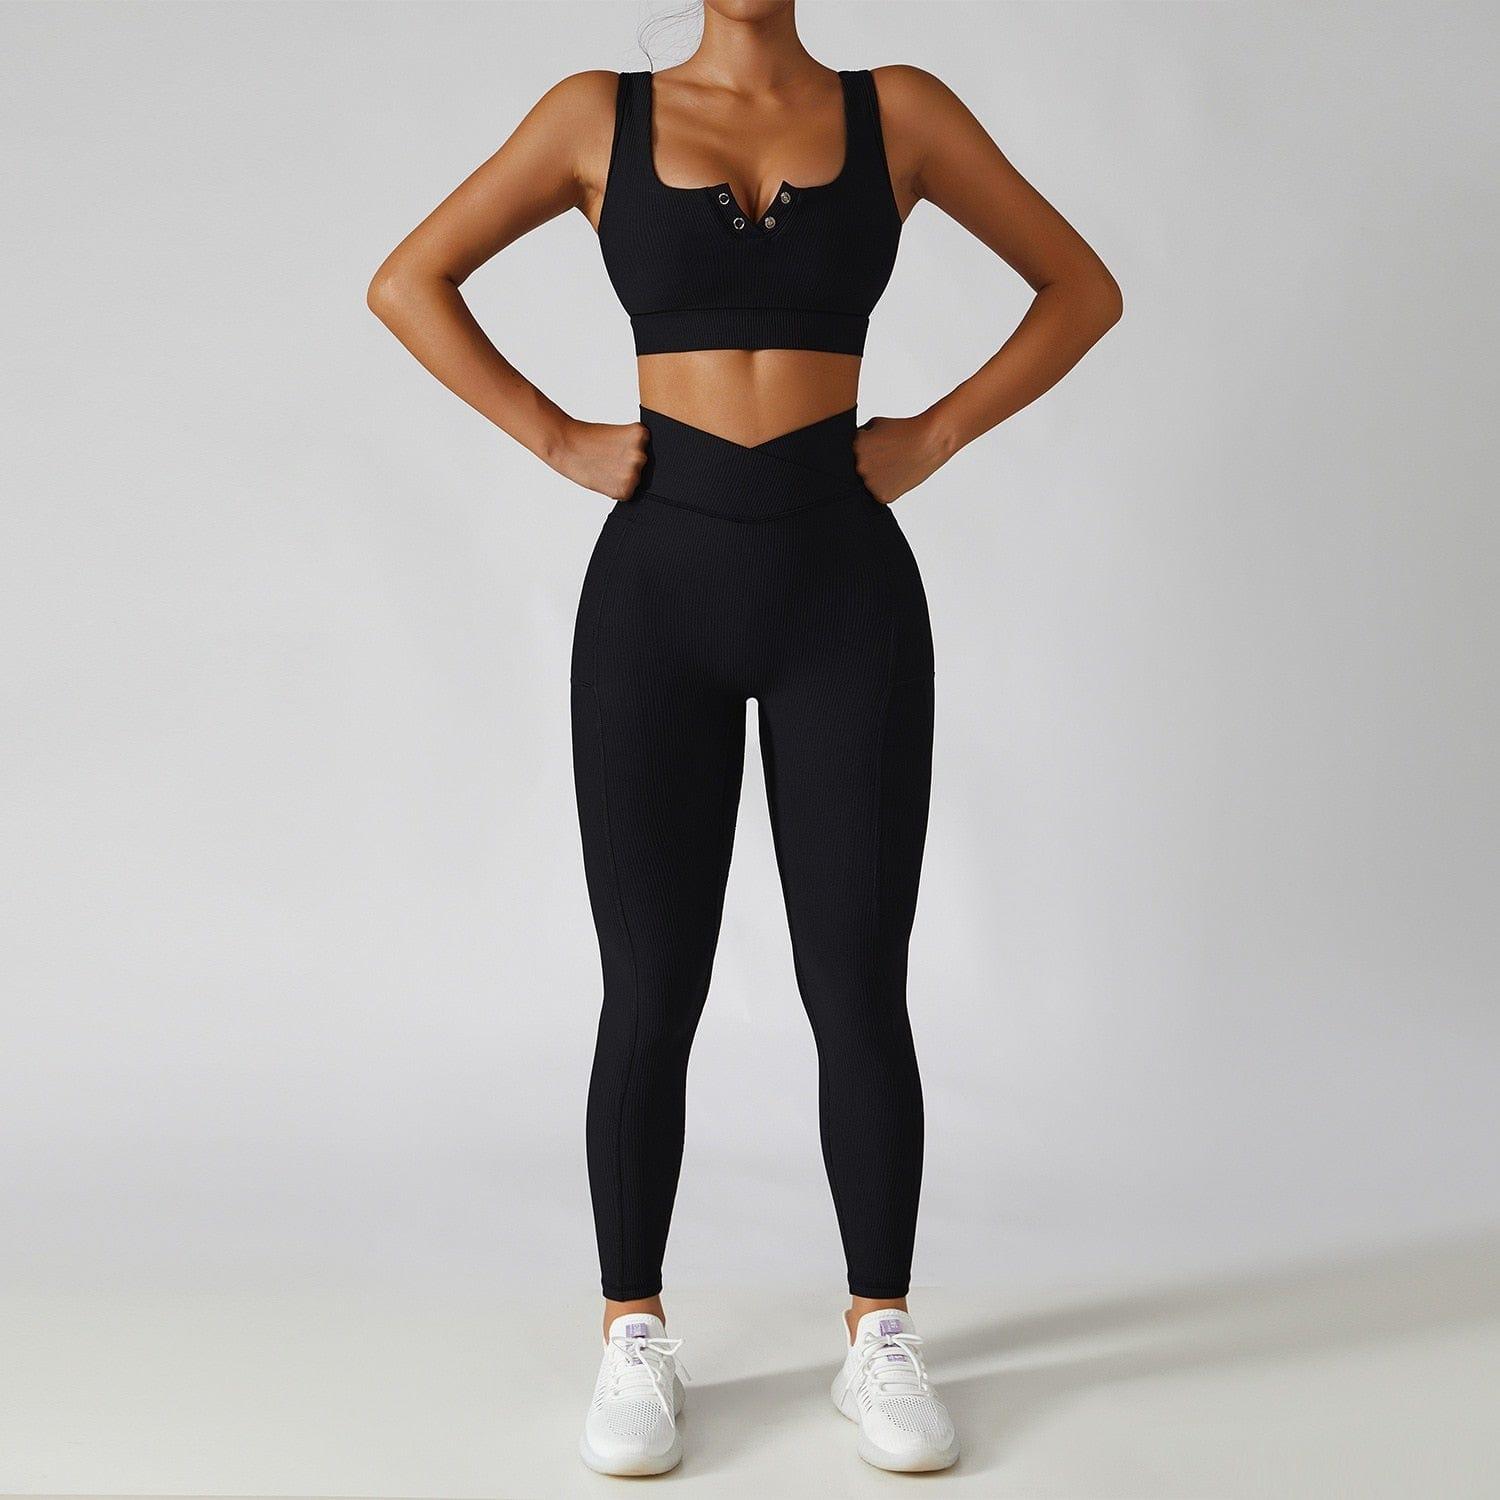 Shop 0 Black suit-3 / S / China 2 Pieces Seamless Women Tracksuit  Yoga Set Running Workout Sportswear Gym Clothes Fitness Bra High Waist Leggings Sports Suit Mademoiselle Home Decor